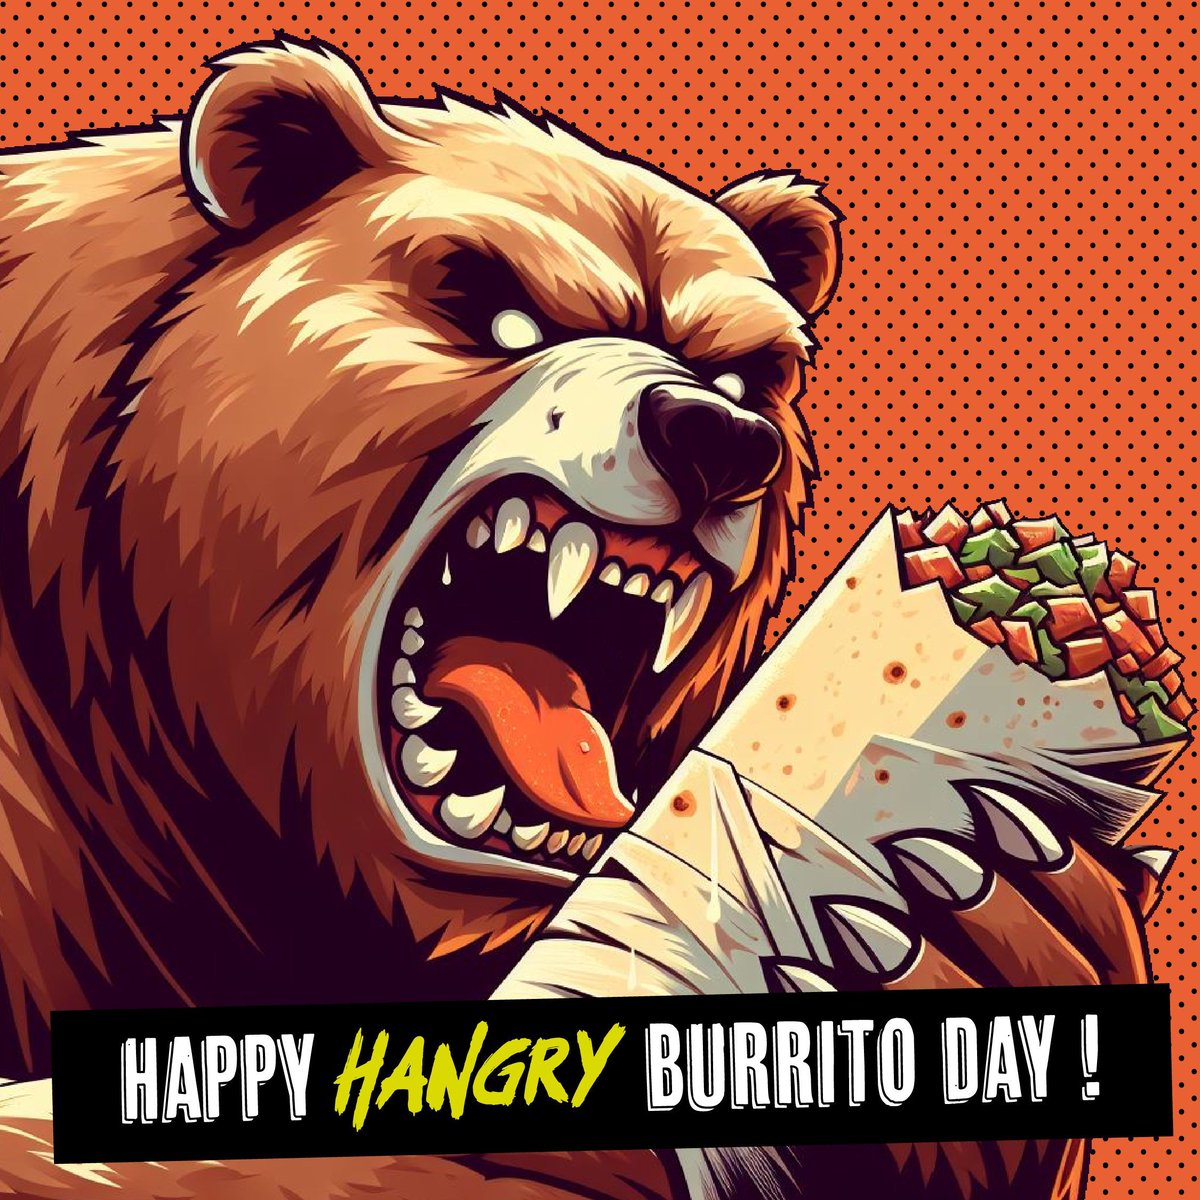 🌯Who doesn't love to devour a chunky burrito!?🐻

It's one of our faves at Hangry HQ😍 

🎉Join the feast and satisfy your inner hangry🎉

#NationalBurritoDay #bing #hangry #bear #food #foodie #yummy